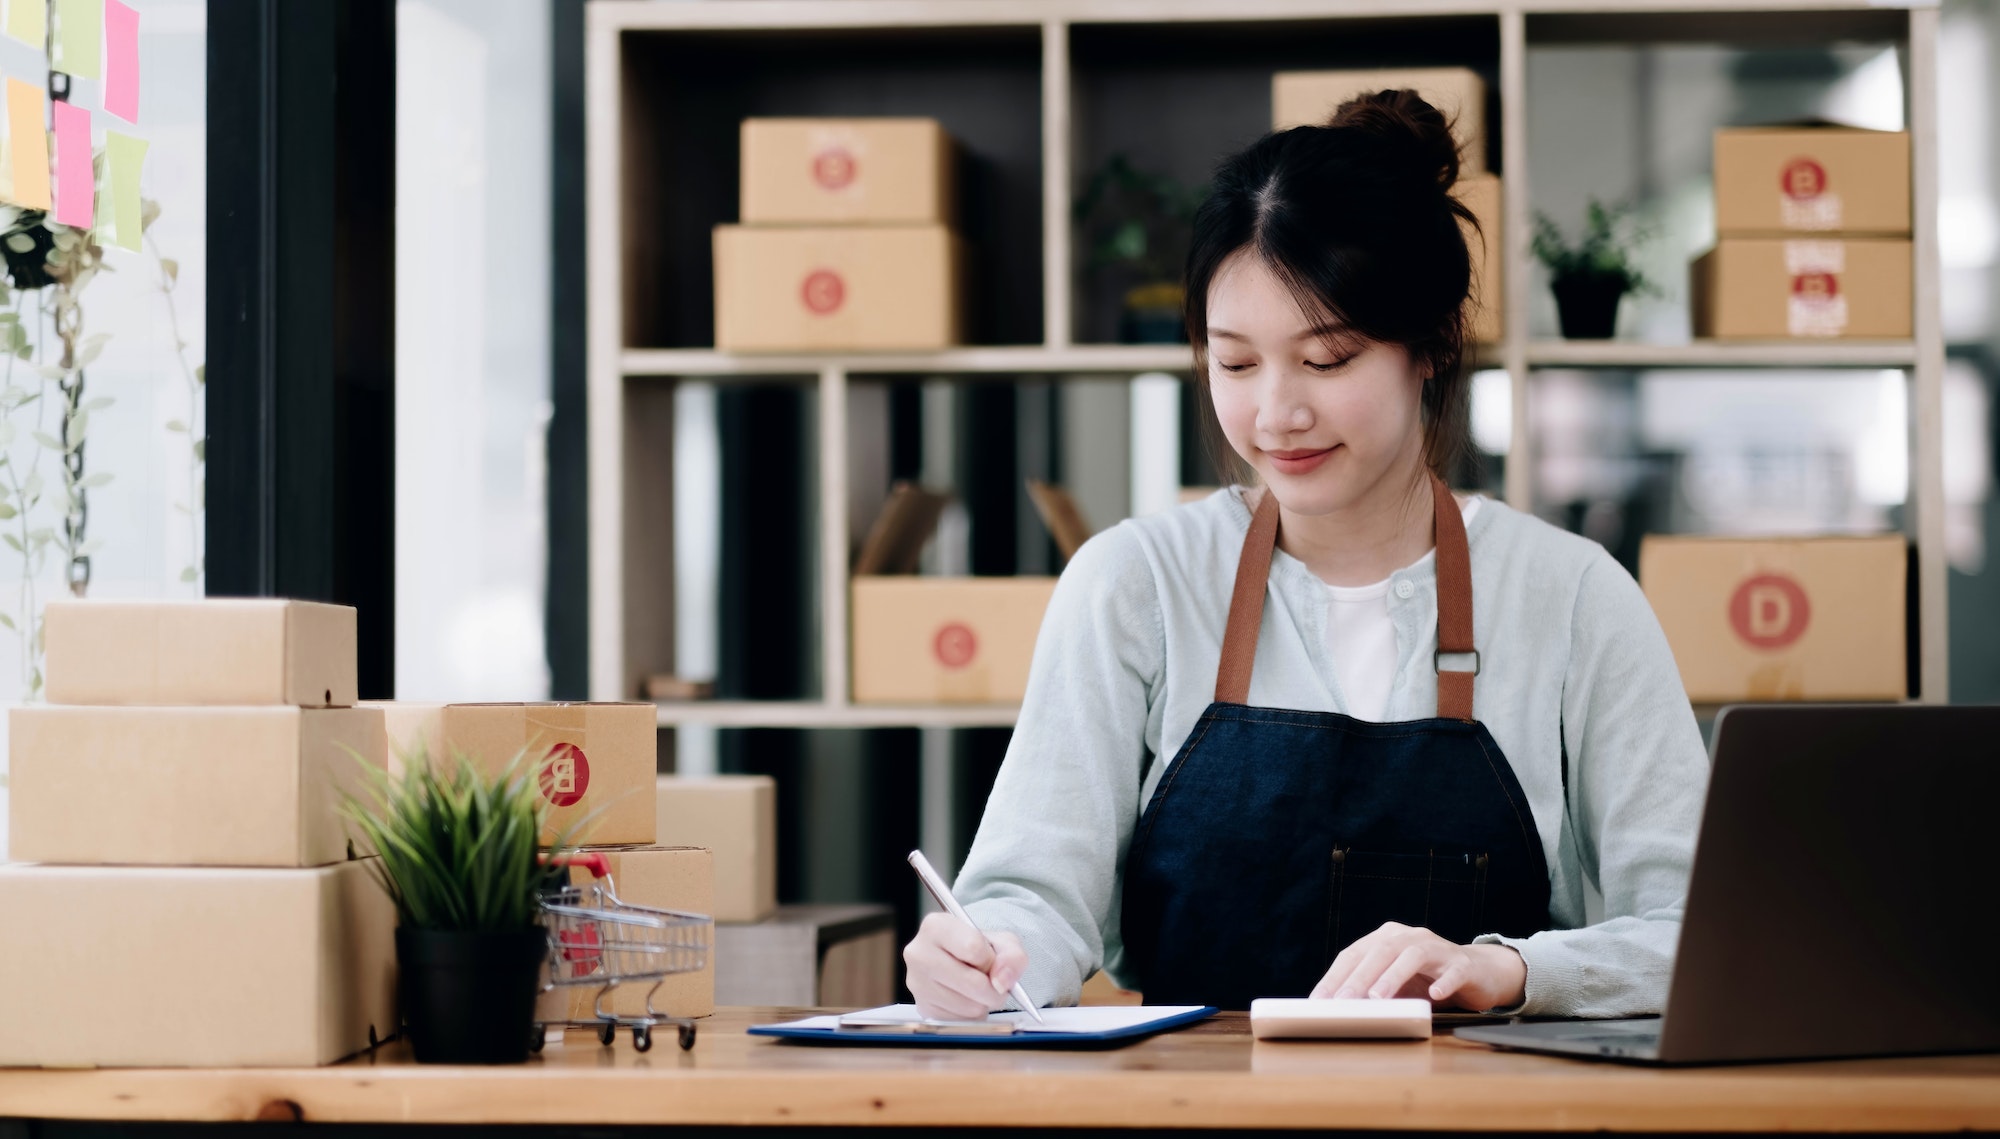 A portrait of a young Asian woman, e-commerce employee sitting in the office full of packages in the